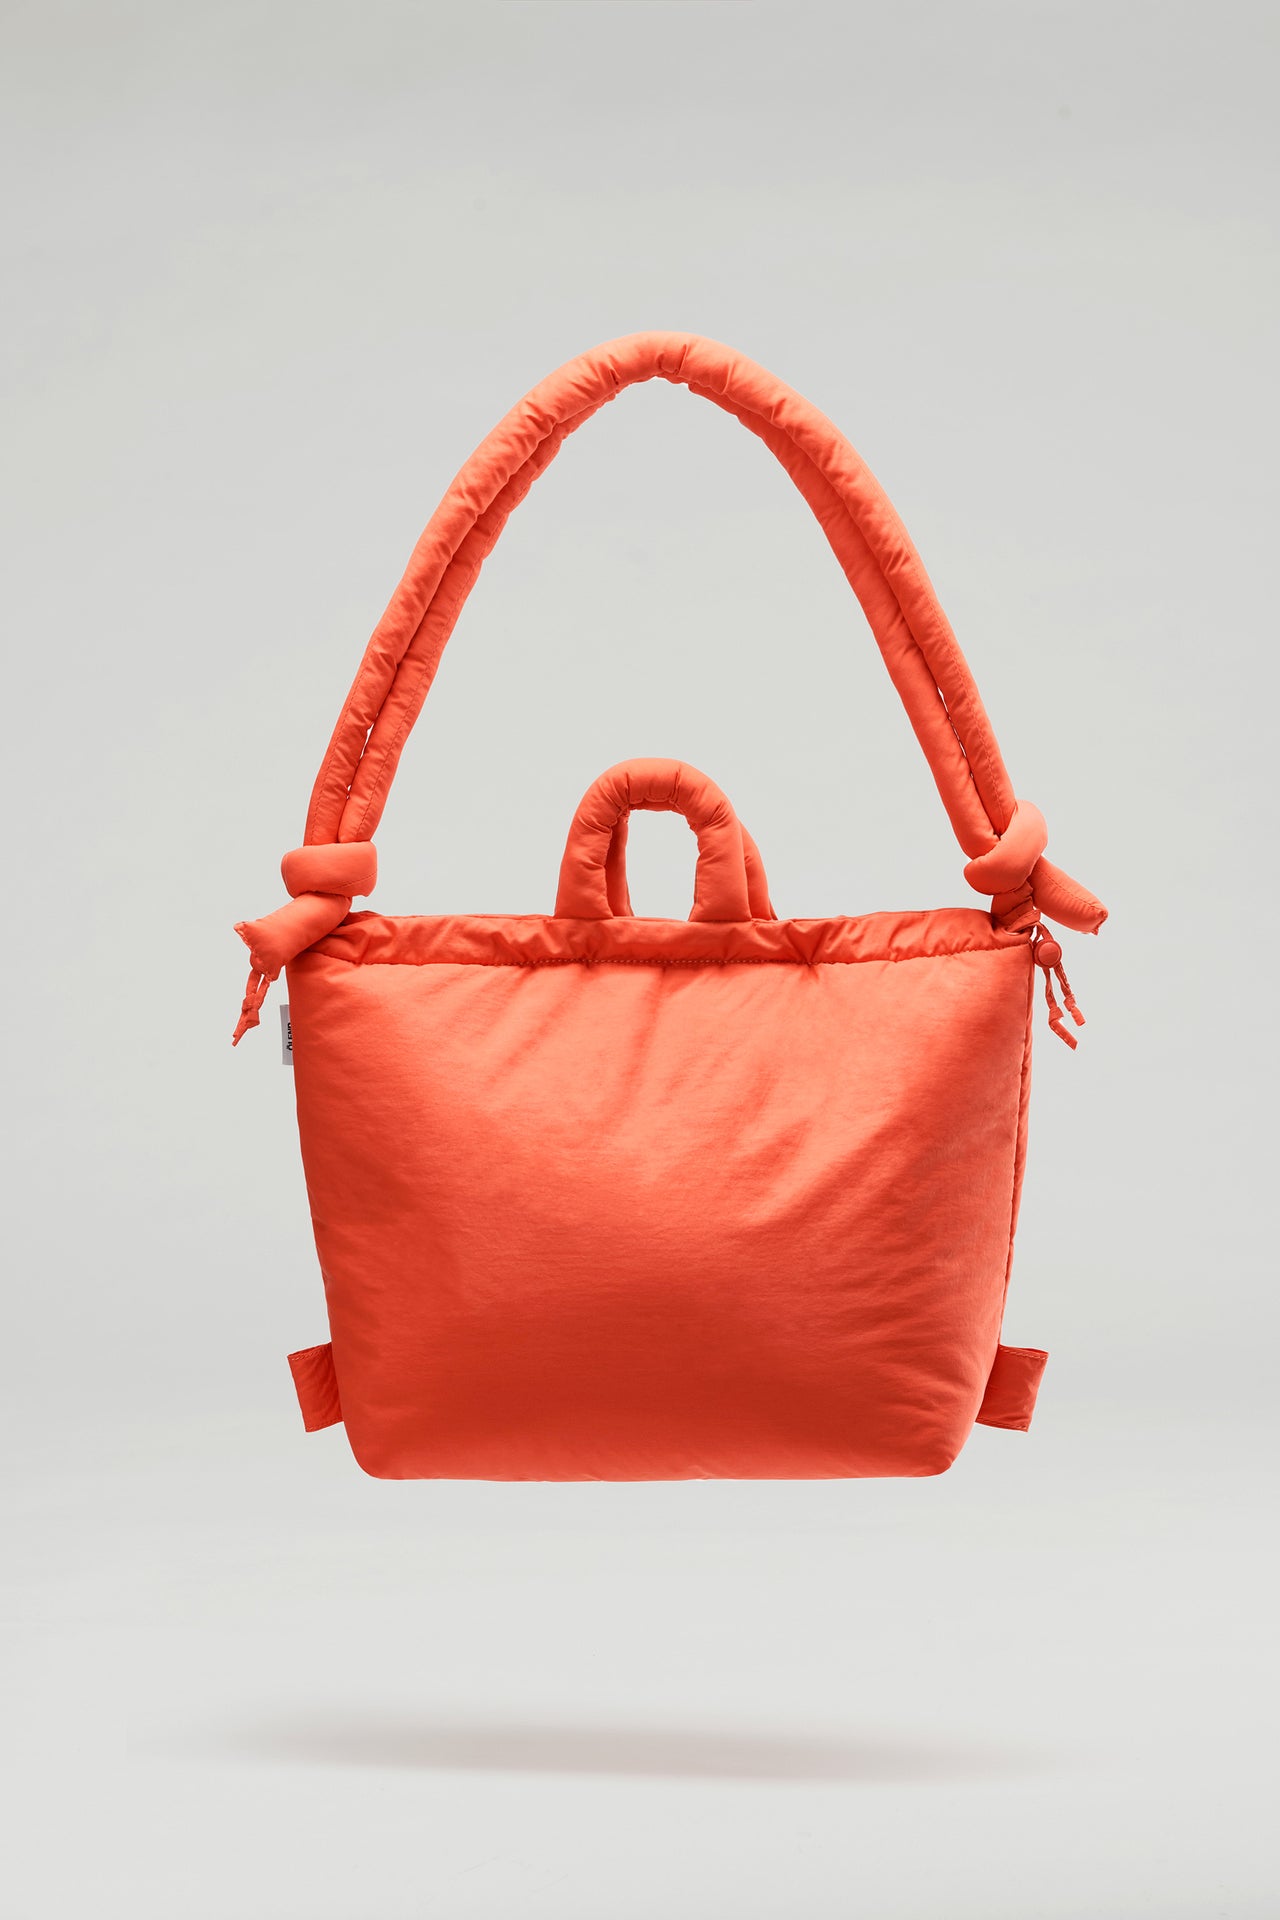 Lands' End Bright Pink & Orange Stripe Canvas Tote, Best Price and Reviews